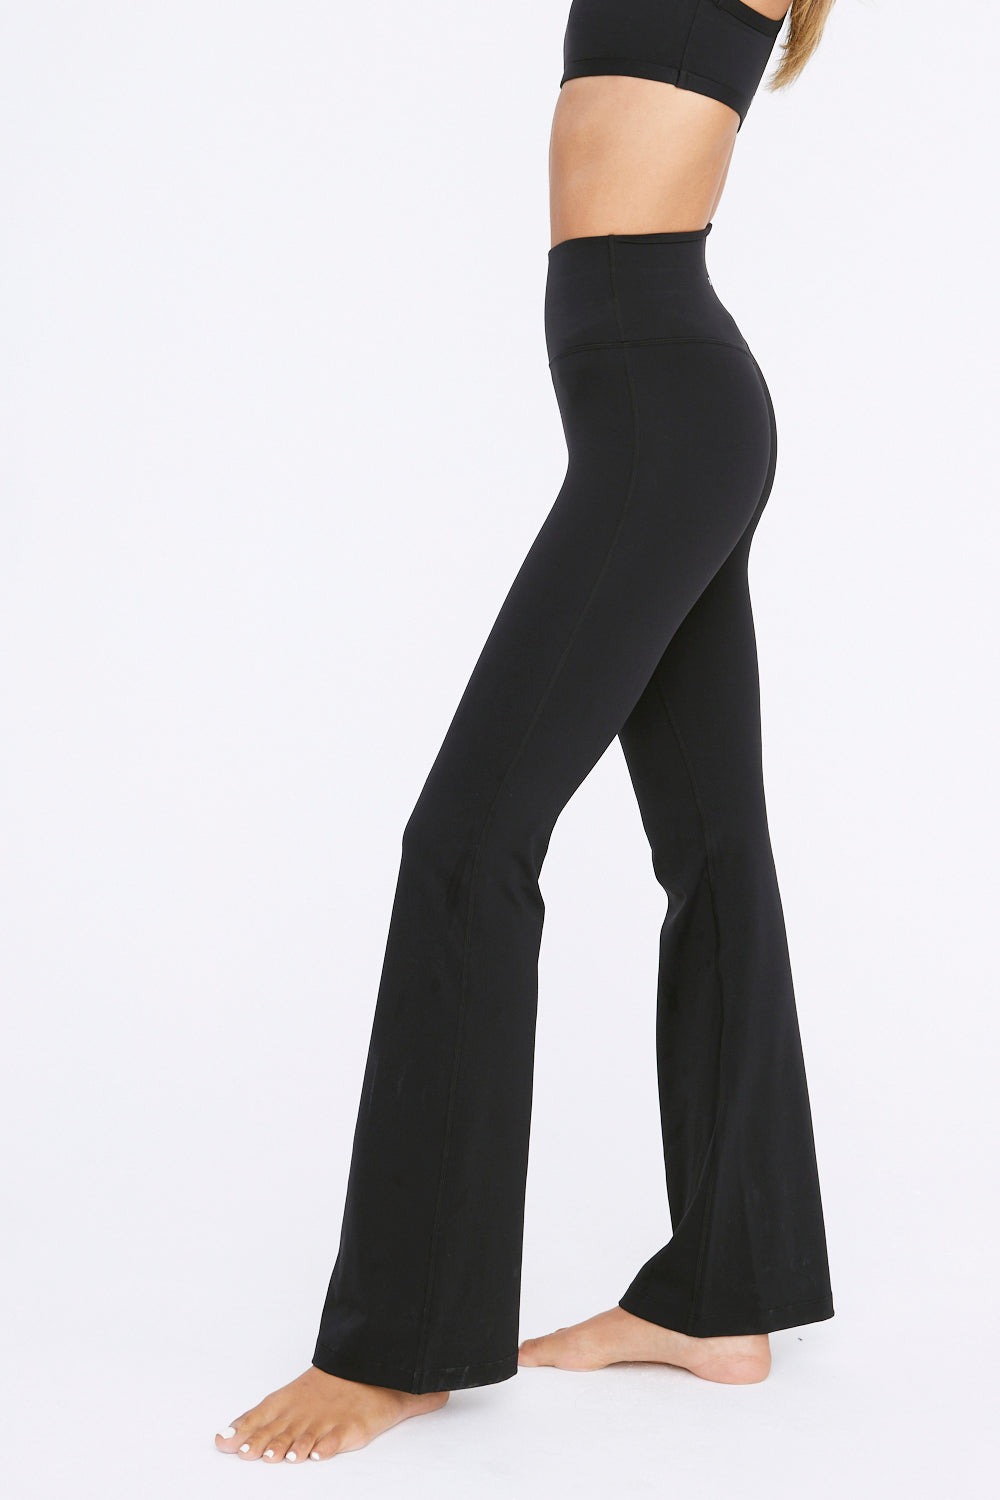 Flared Leggings with No Front Seam: The Ultimate Comfort and Style